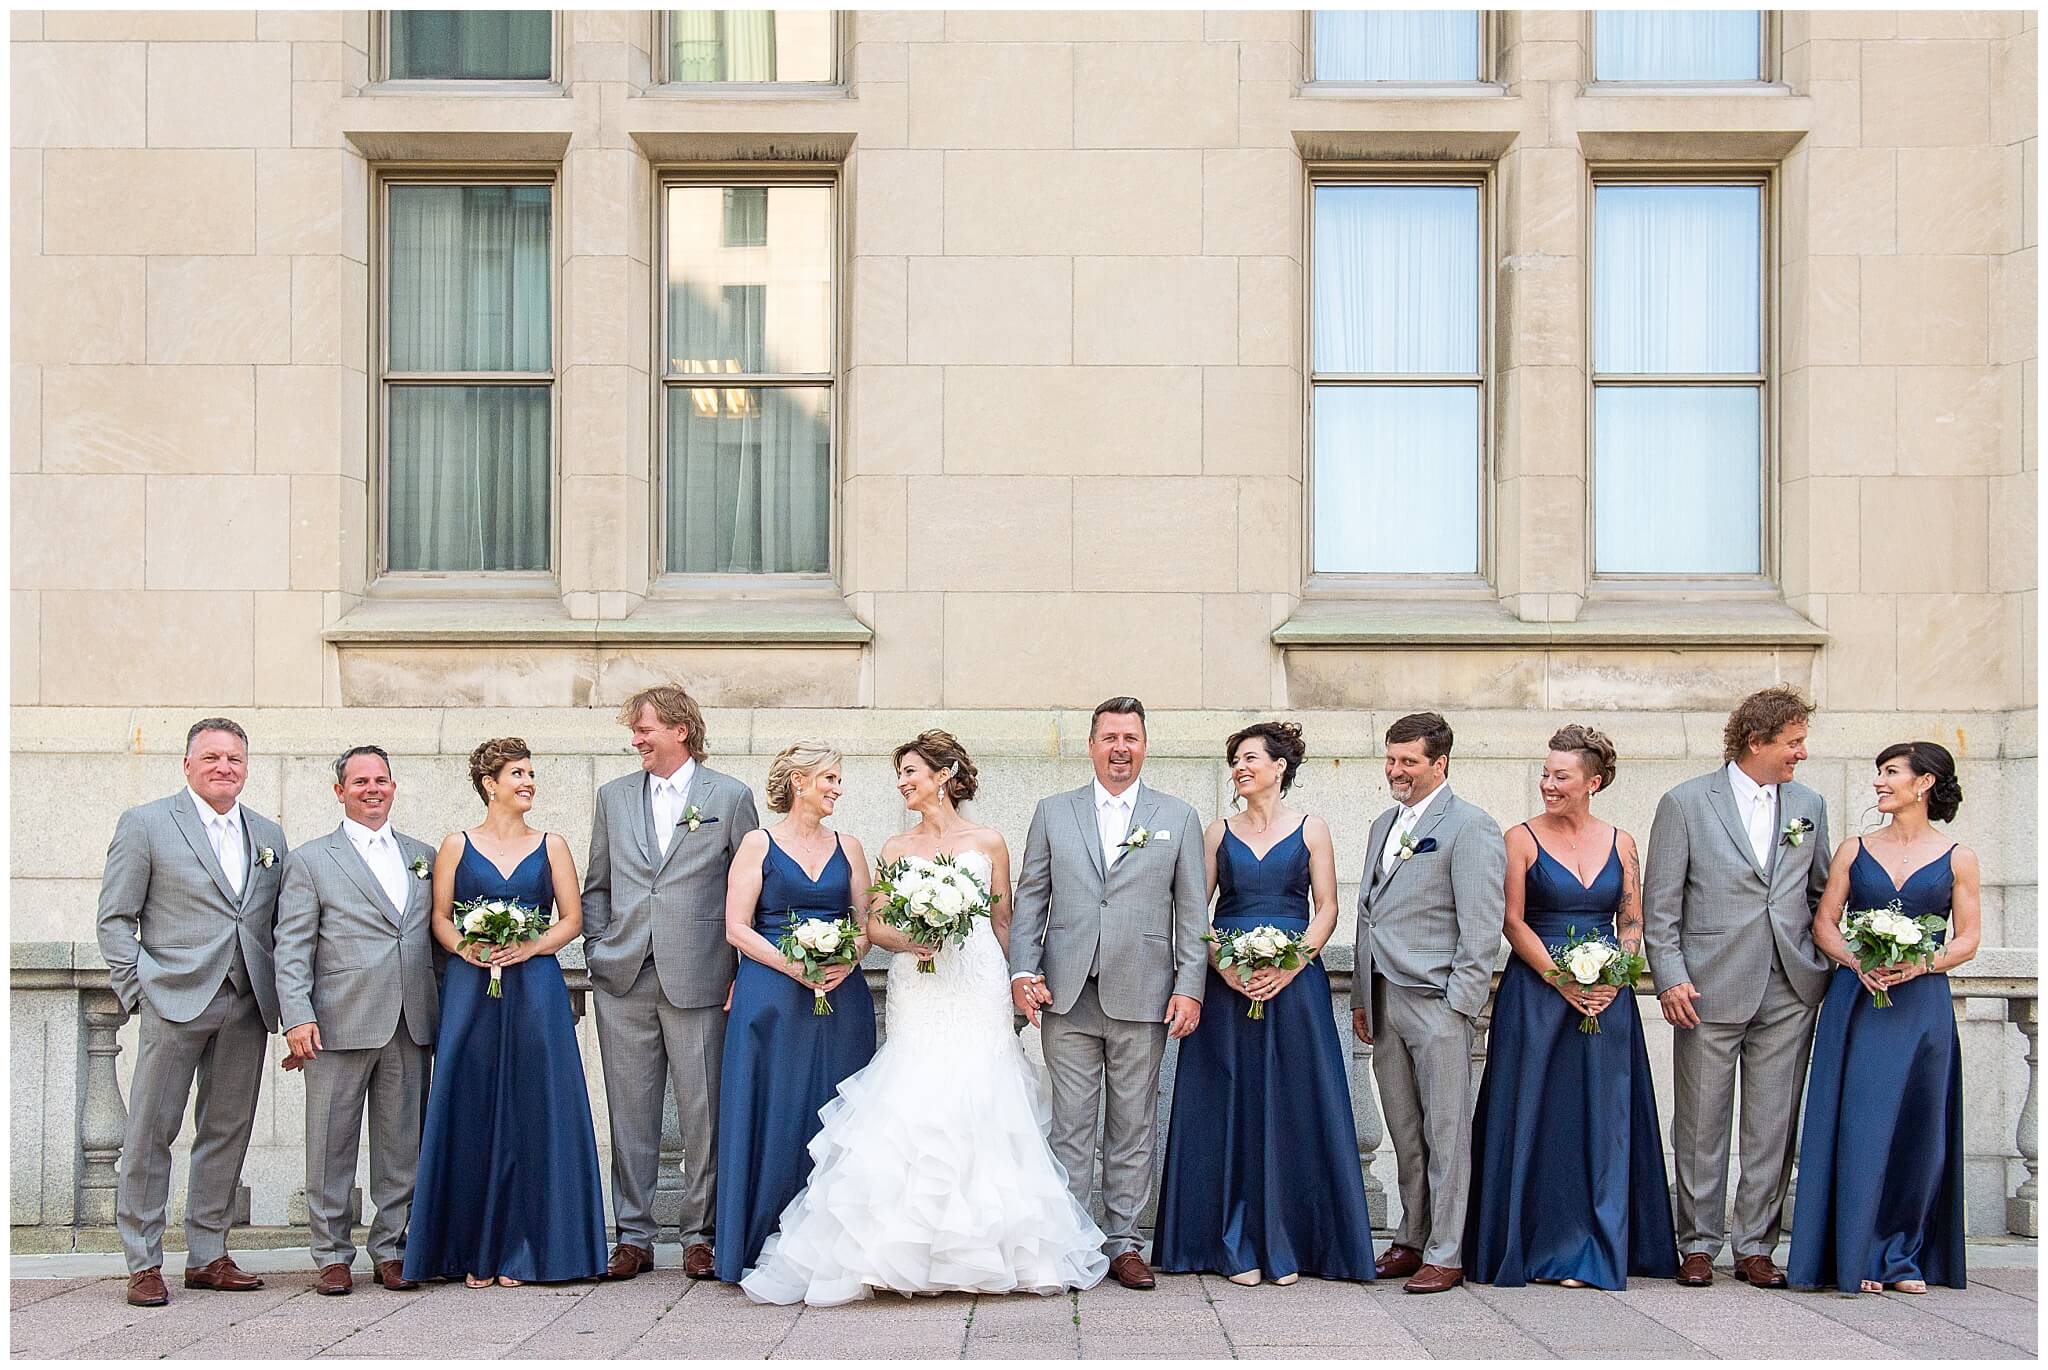 a bride and groom with their bridesmaids in navy dresses and their groomsmen in grey suits.  Taken outside of the Chateau Laurier wedding venue